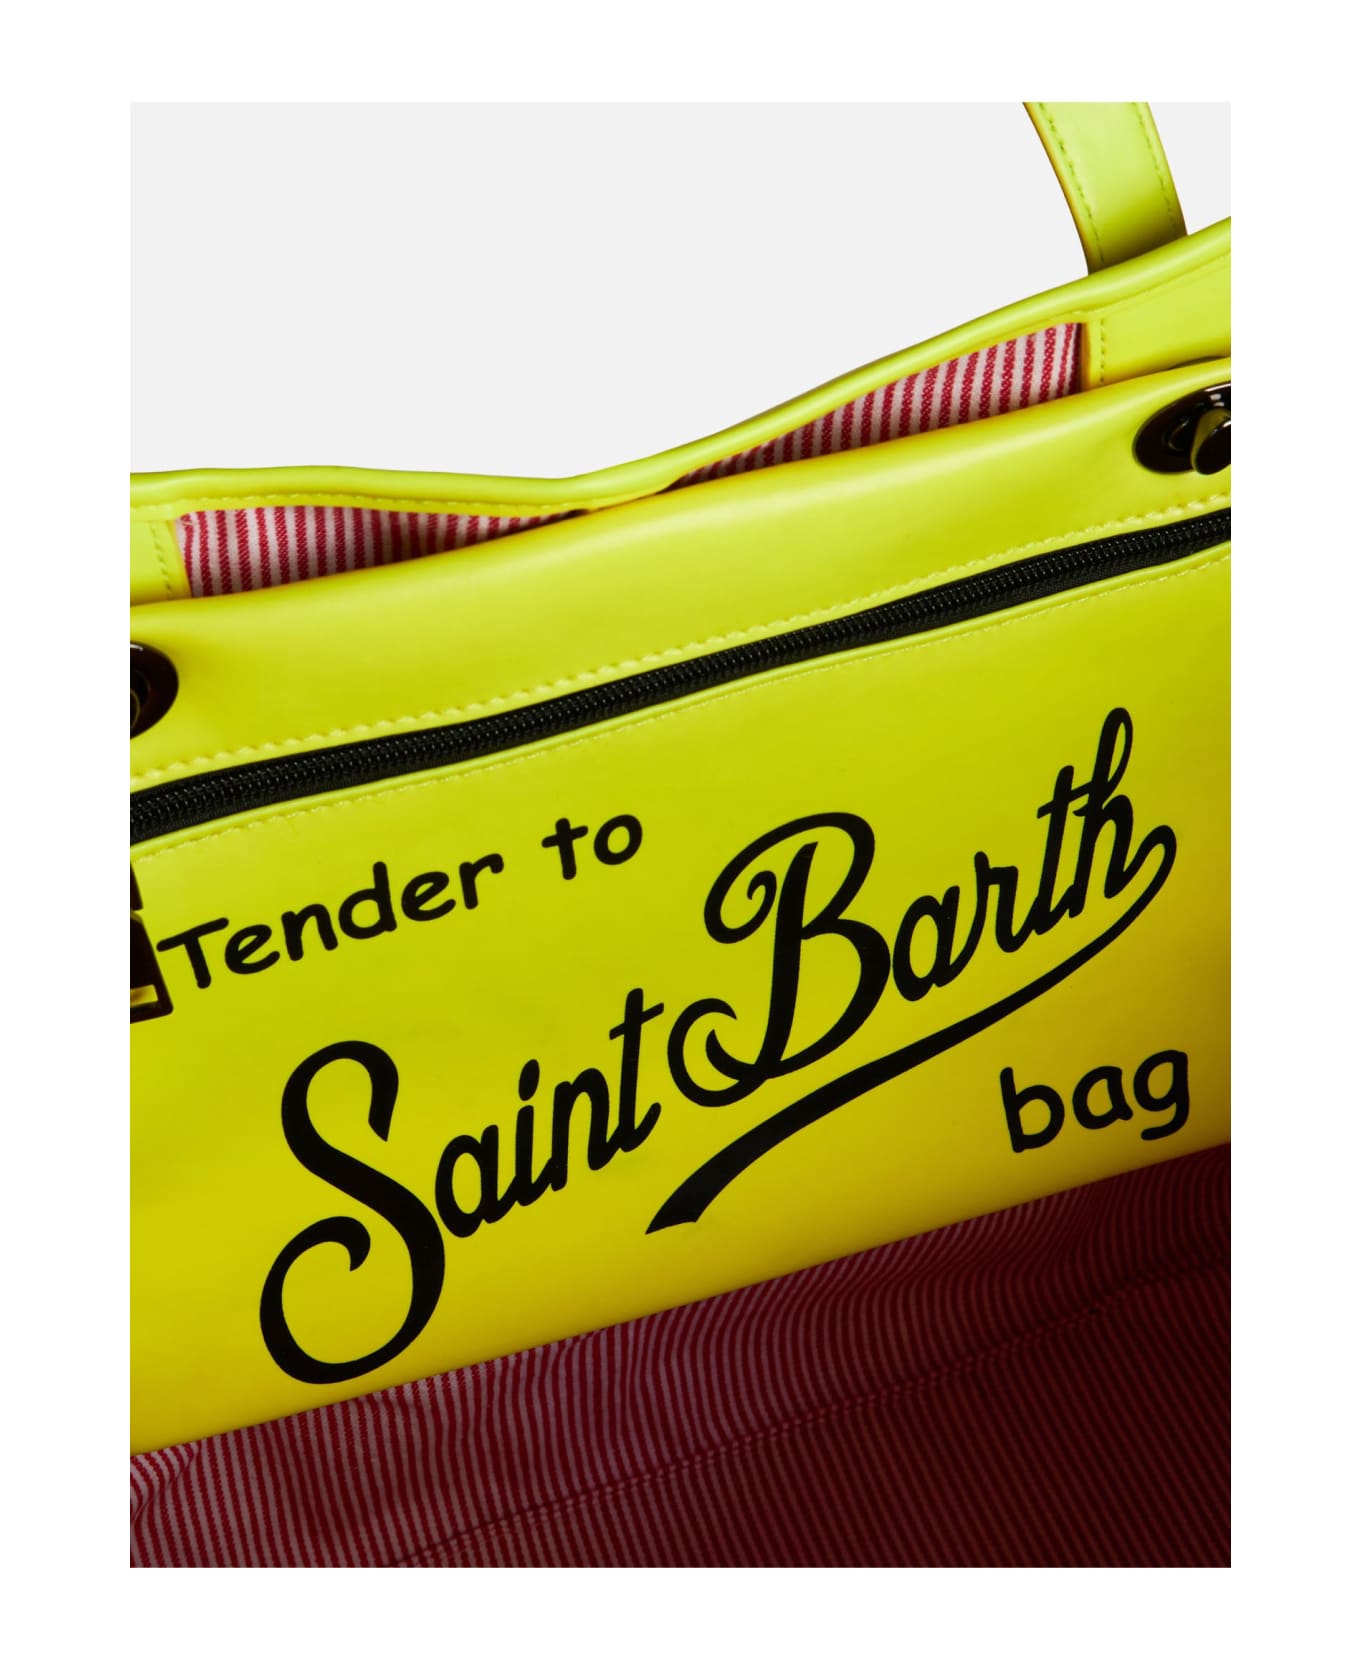 MC2 Saint Barth Silver Reflex Bag With Fluo Yellow Details - YELLOW